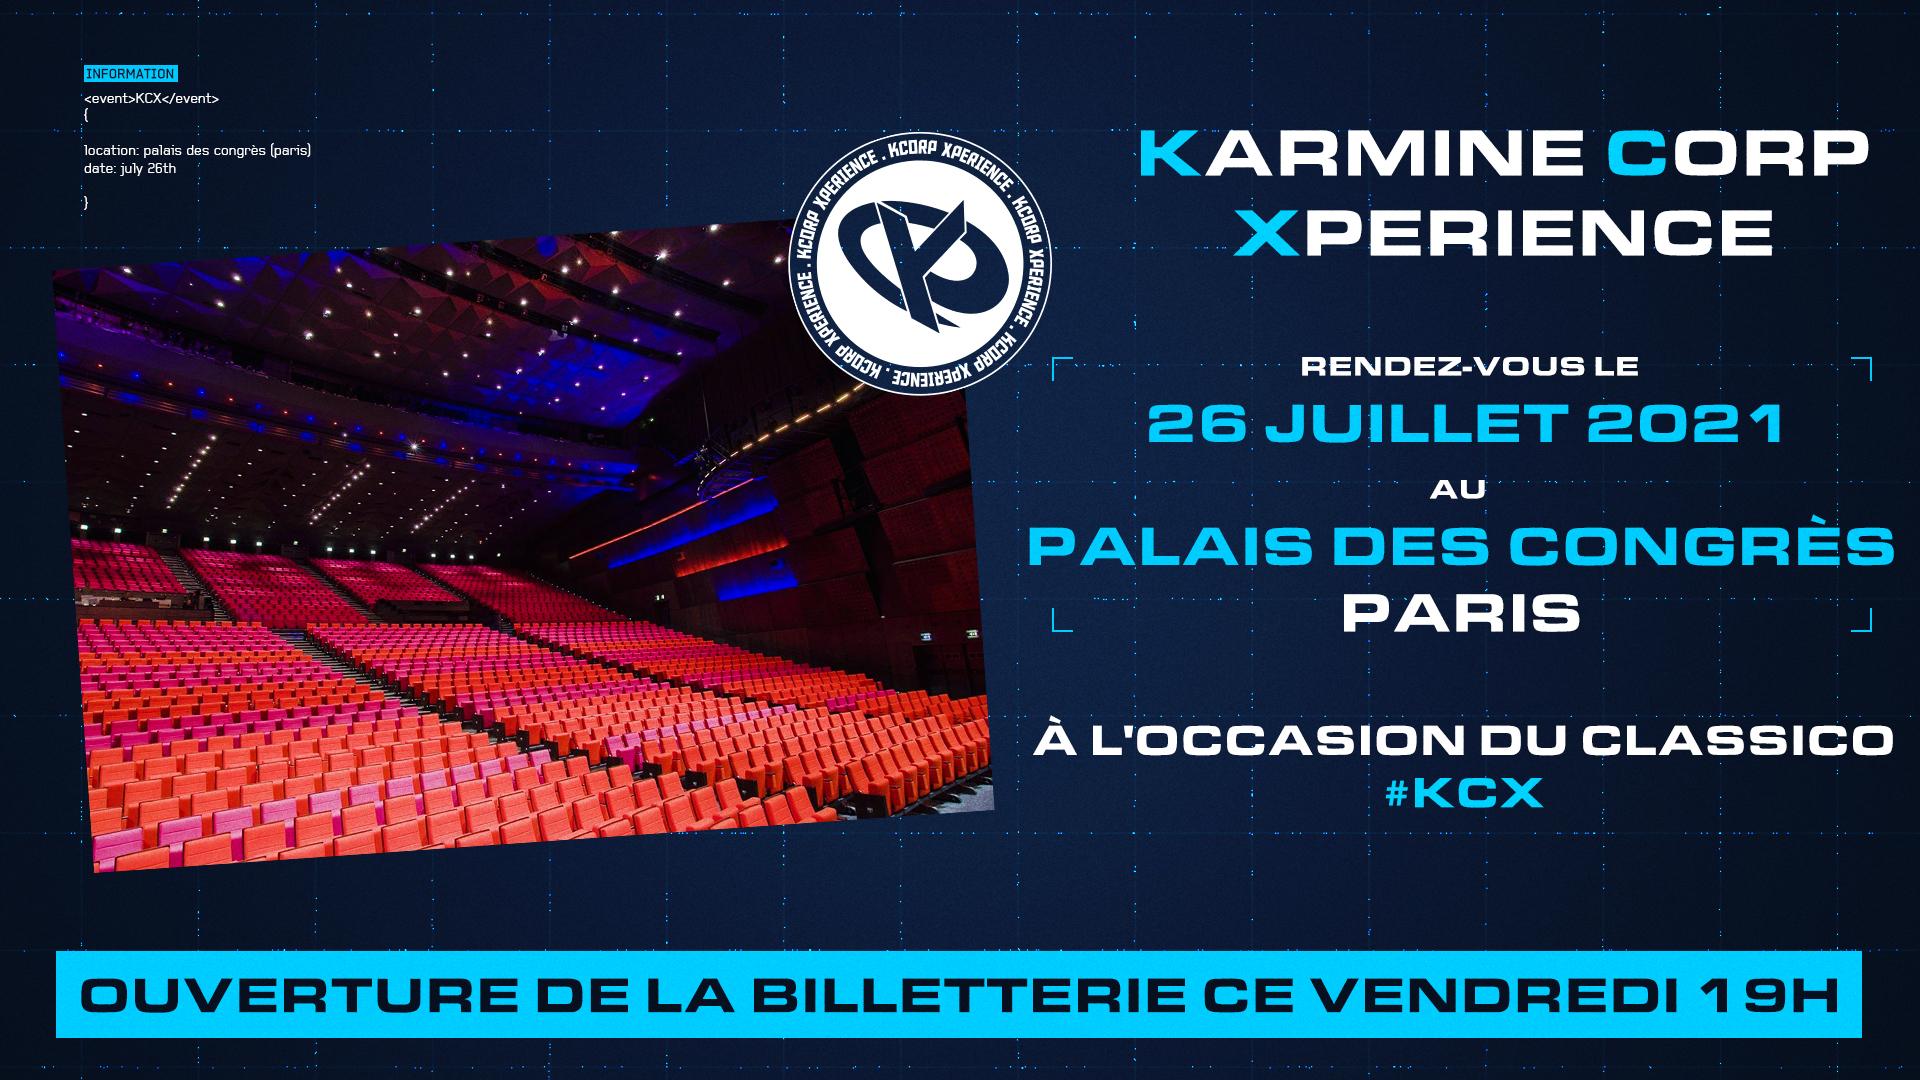 K CORP Xperience